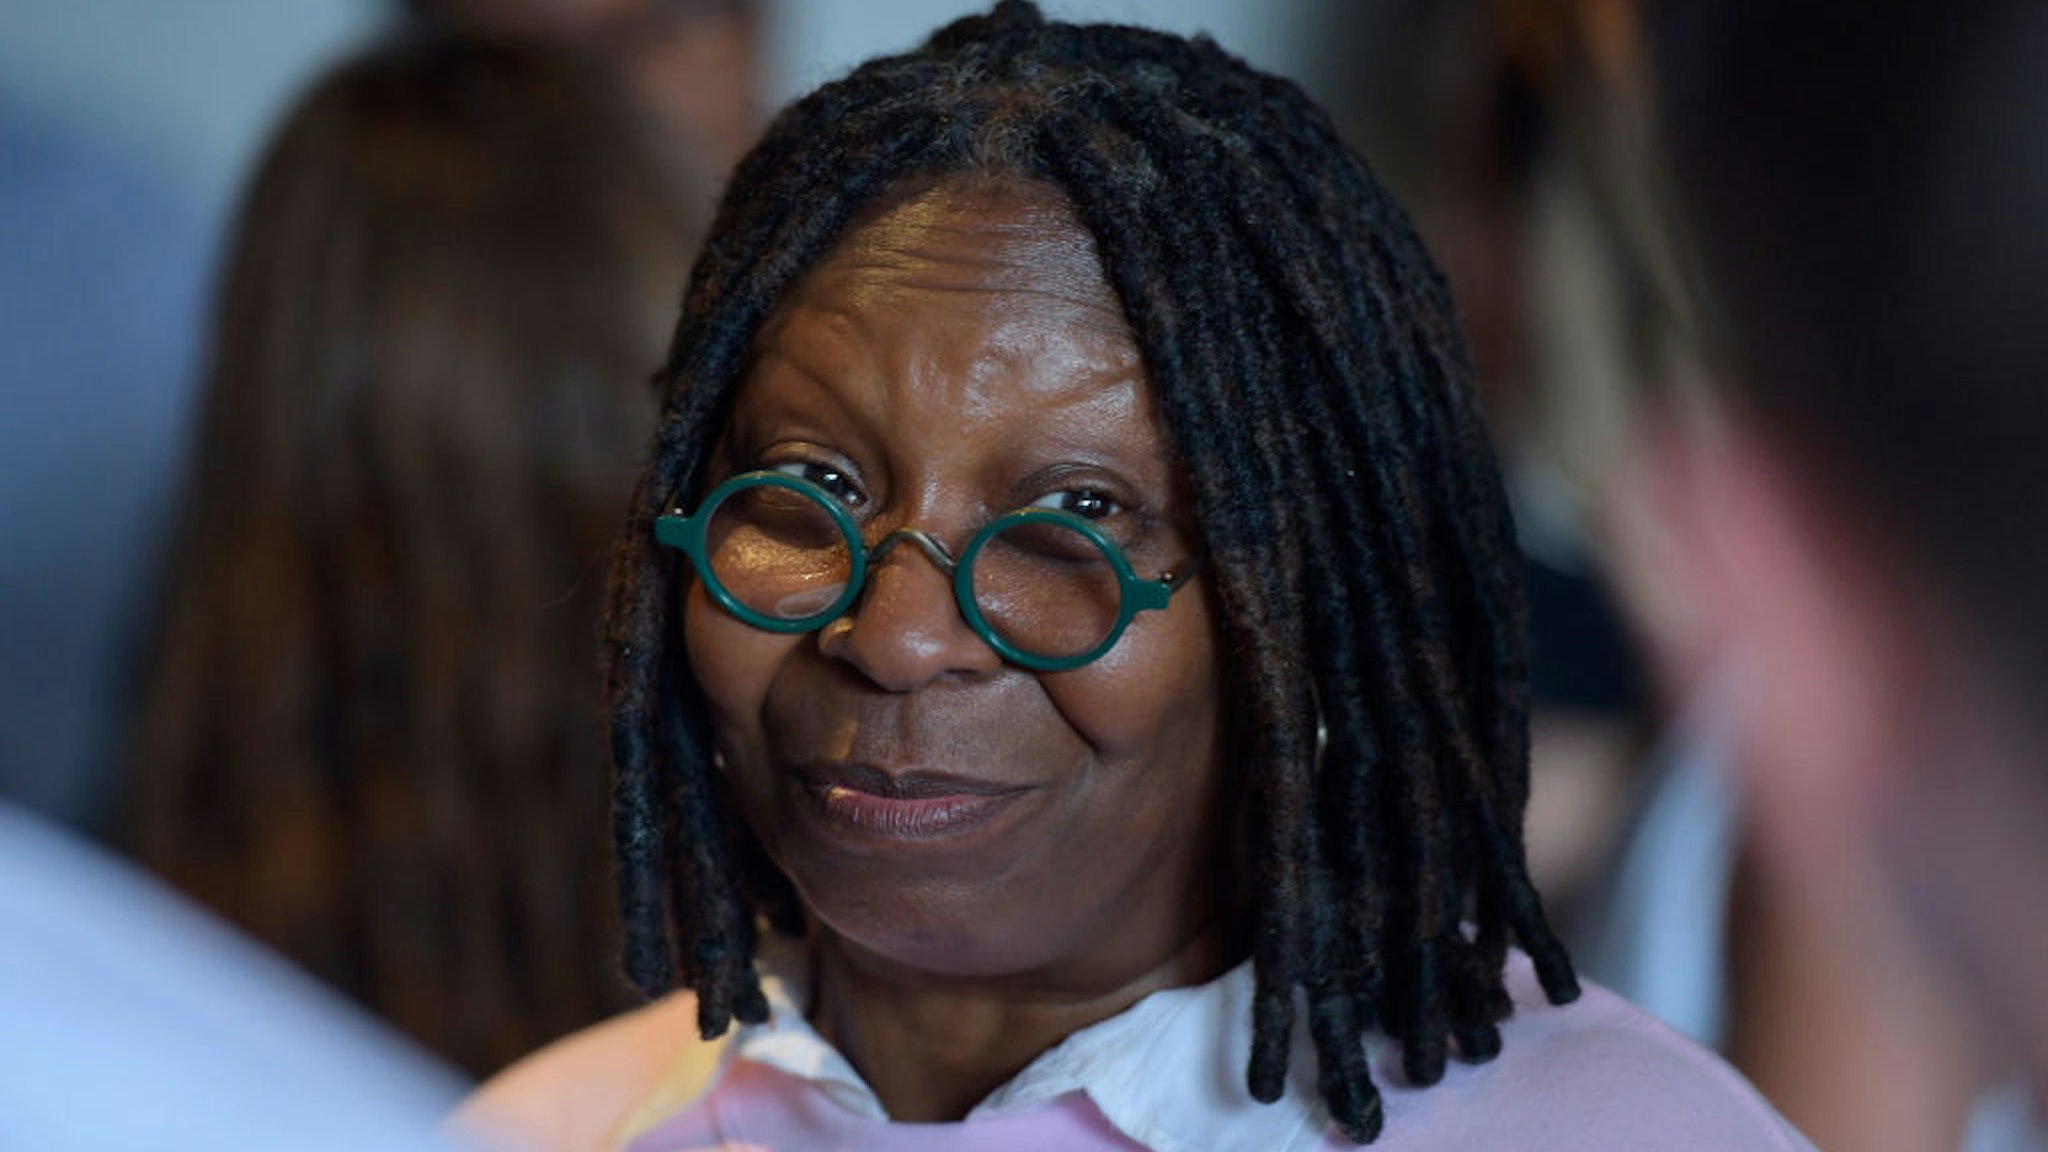 NEW YORK, NY - SEPTEMBER 07: Whoopi Goldberg attends the Victor Glemaud presentation during New York Fashion Week: The Shows at Sunken Living Room at Spring Studios on September 7, 2018 in New York City. (Photo by Roy Rochlin/Getty Images for New York Fashion Week: The Shows)